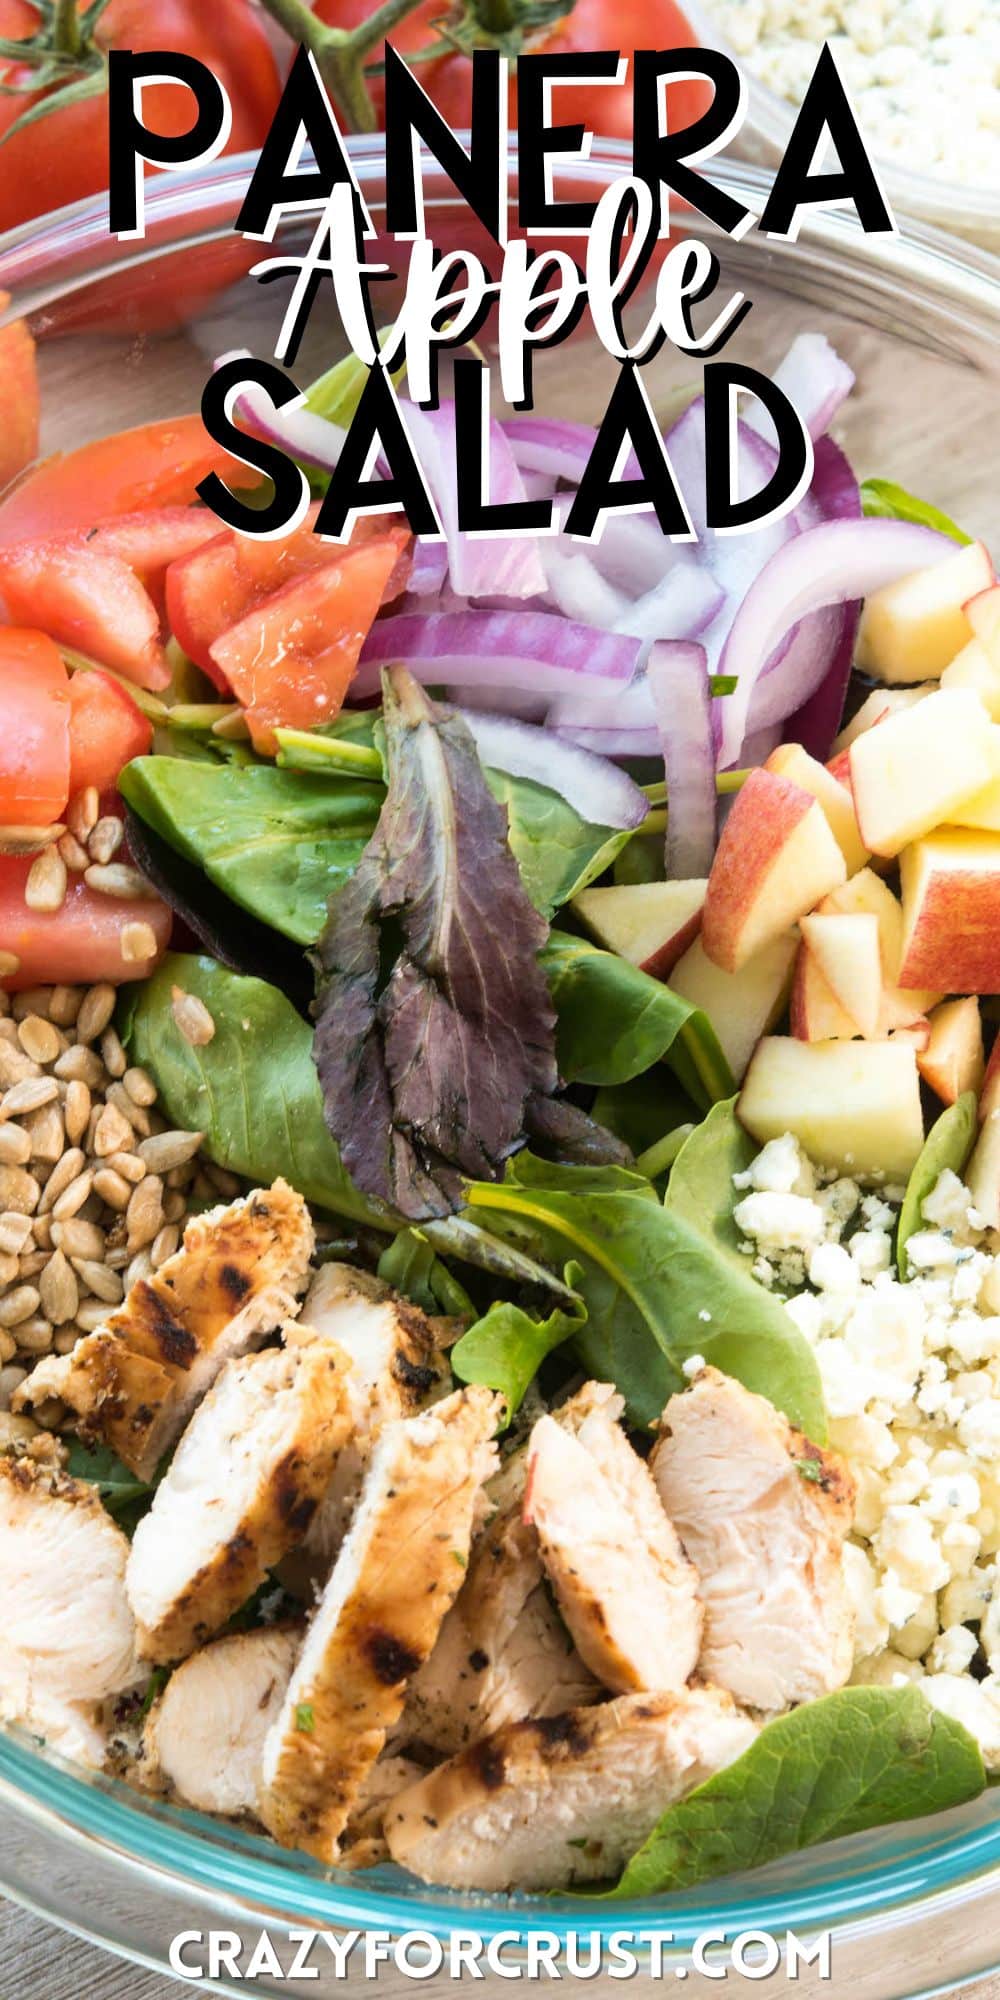 salad mixed with apples and onions and chicken and more in a clear bowl with words on the image.